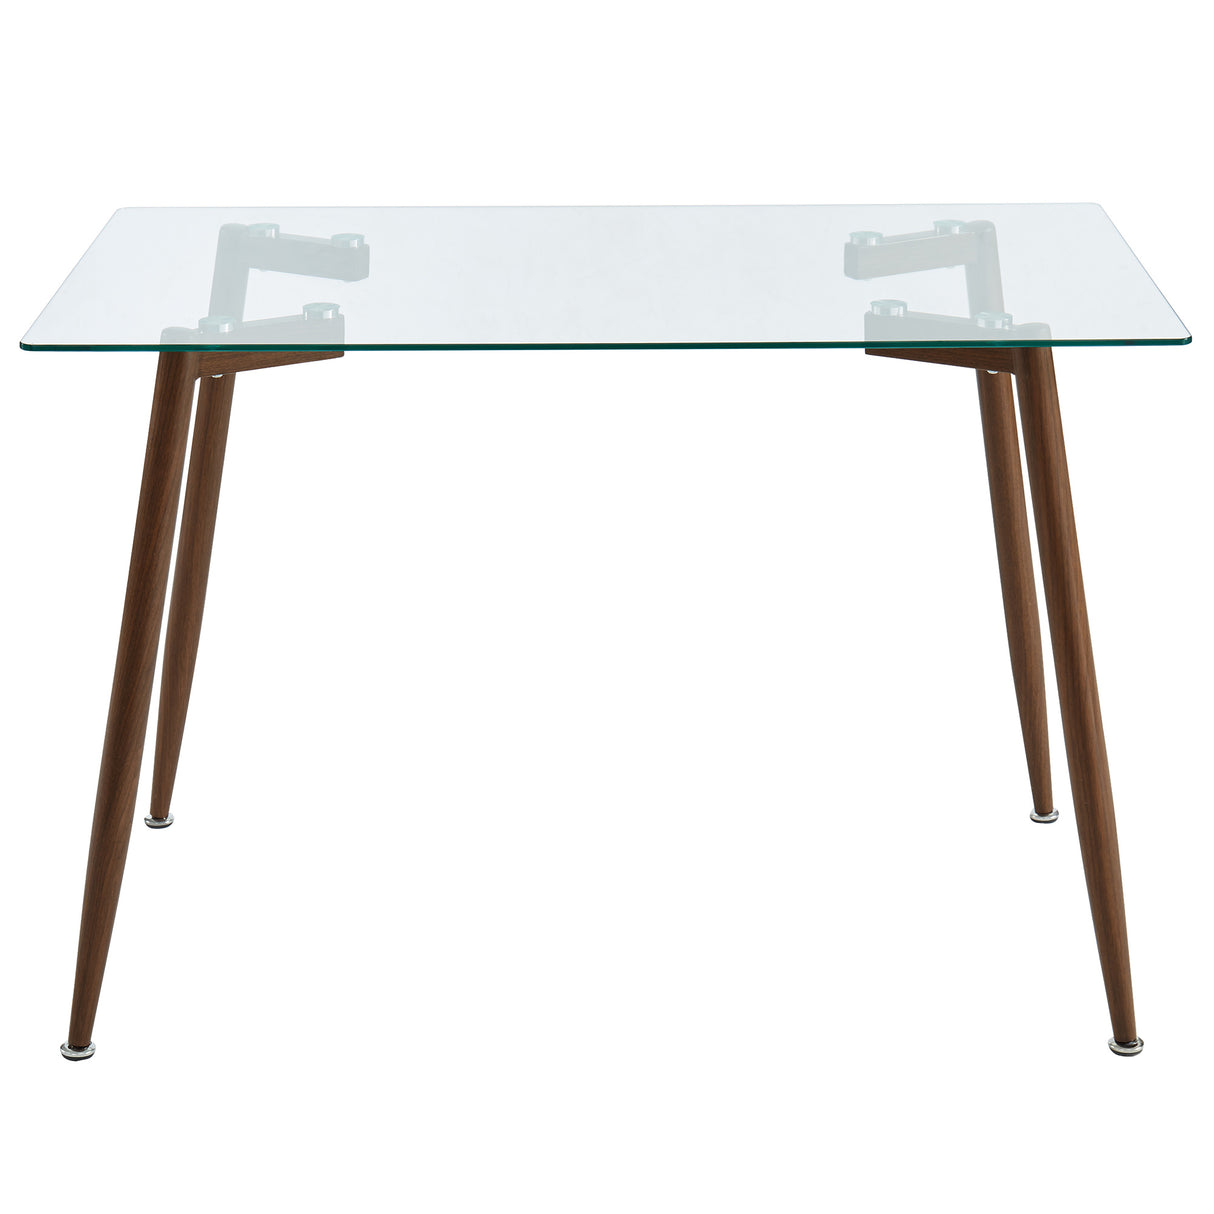 Abbot Glass Dining Table Walnut